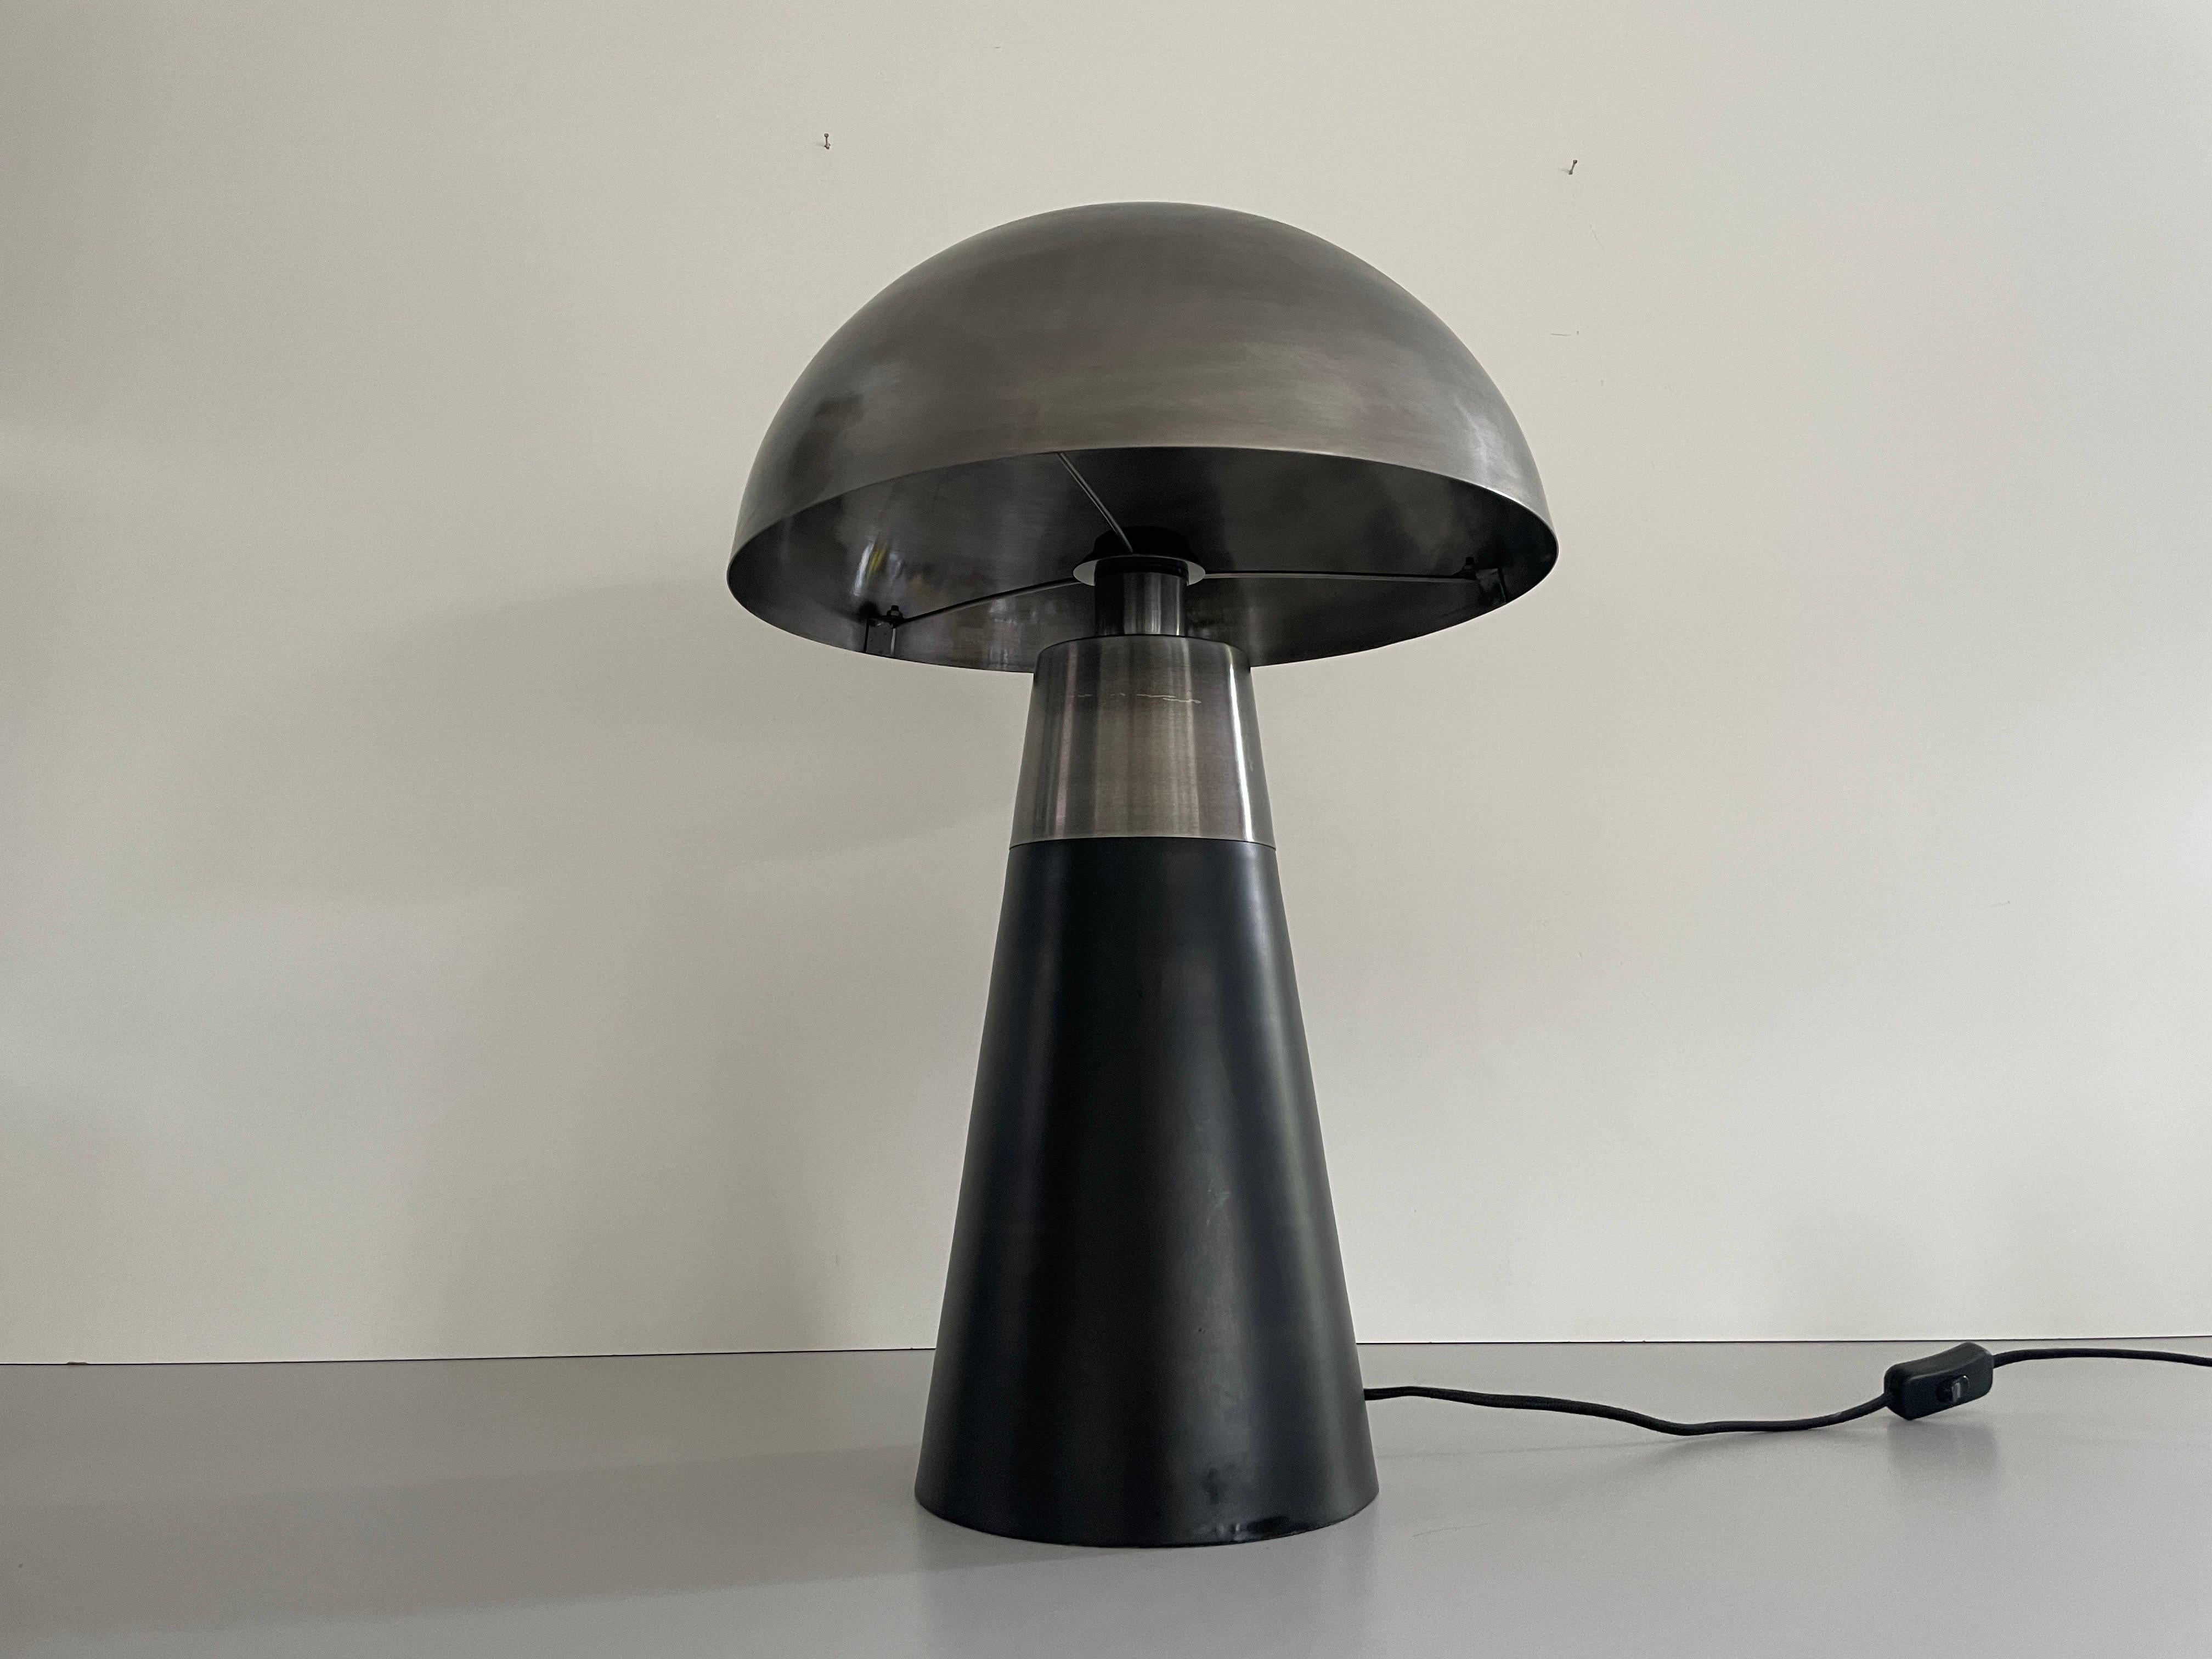 Space Age Muschroom and Conic Design Large Table Lamp by LAMBERT, 1980s, Germany For Sale